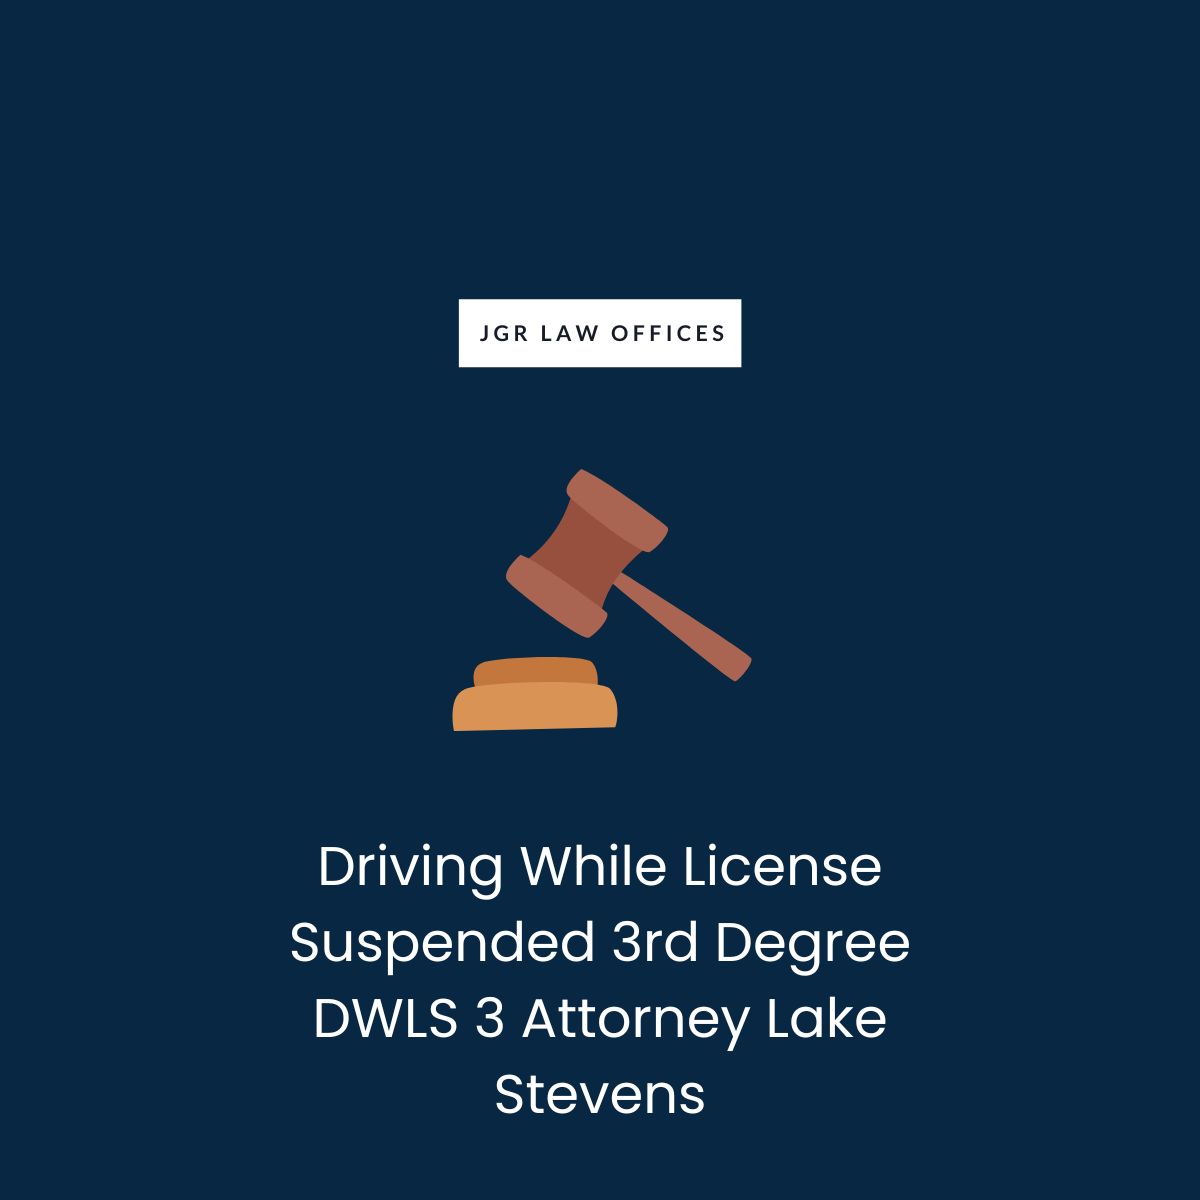 Driving While License Suspended 3rd Degree DWLS 3 Attorney Lake Stevens